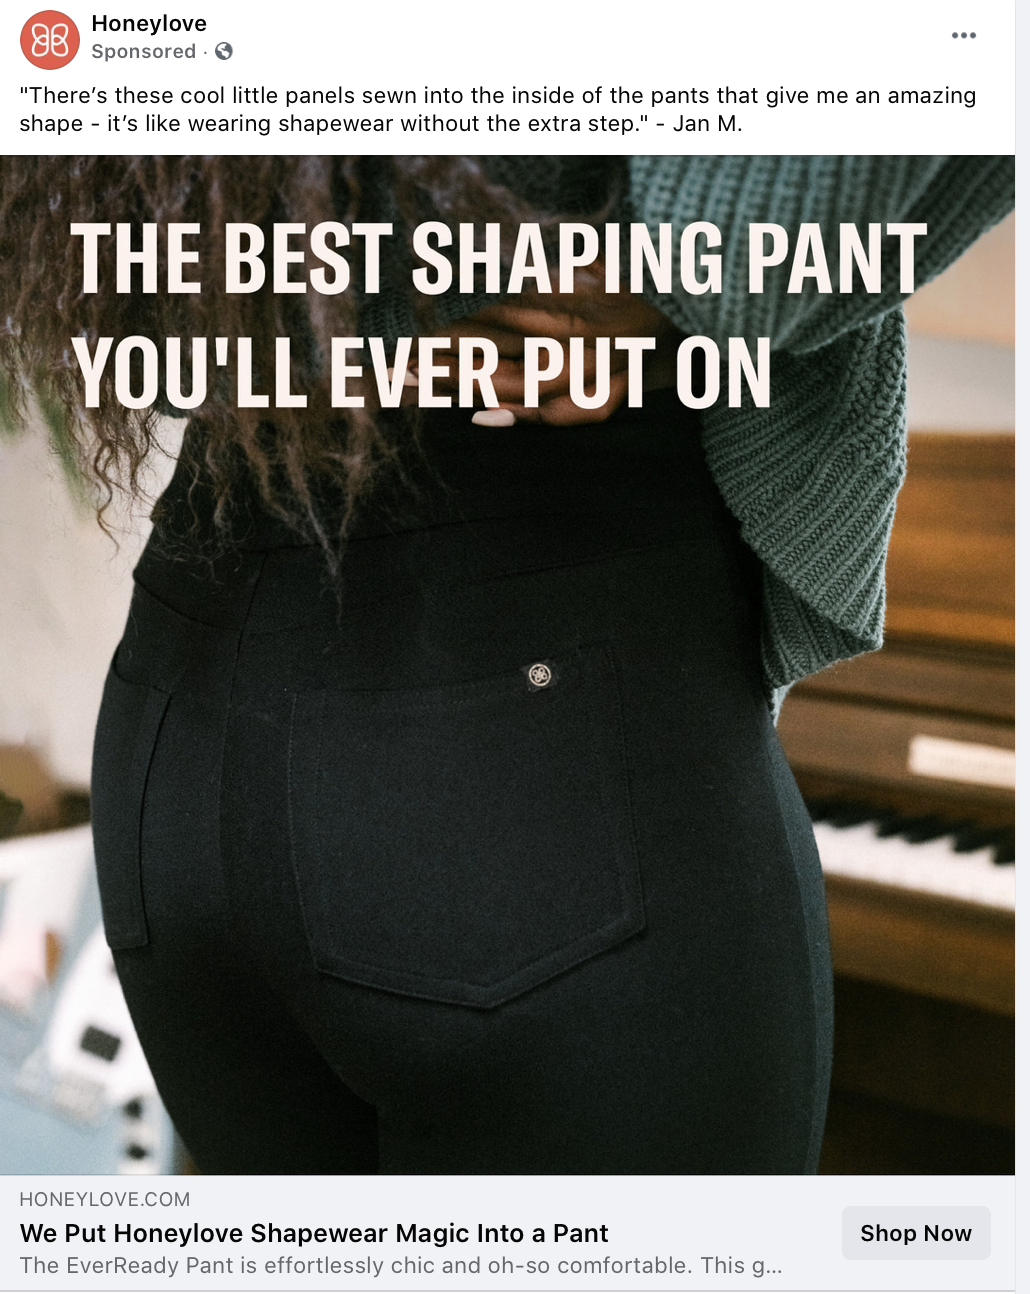 A Facebook ad with a quote from a customer that says "There's these cool little panels sewn into the side of the pants that give me an amazing shape - it's like wearing shapewear without the extra step."